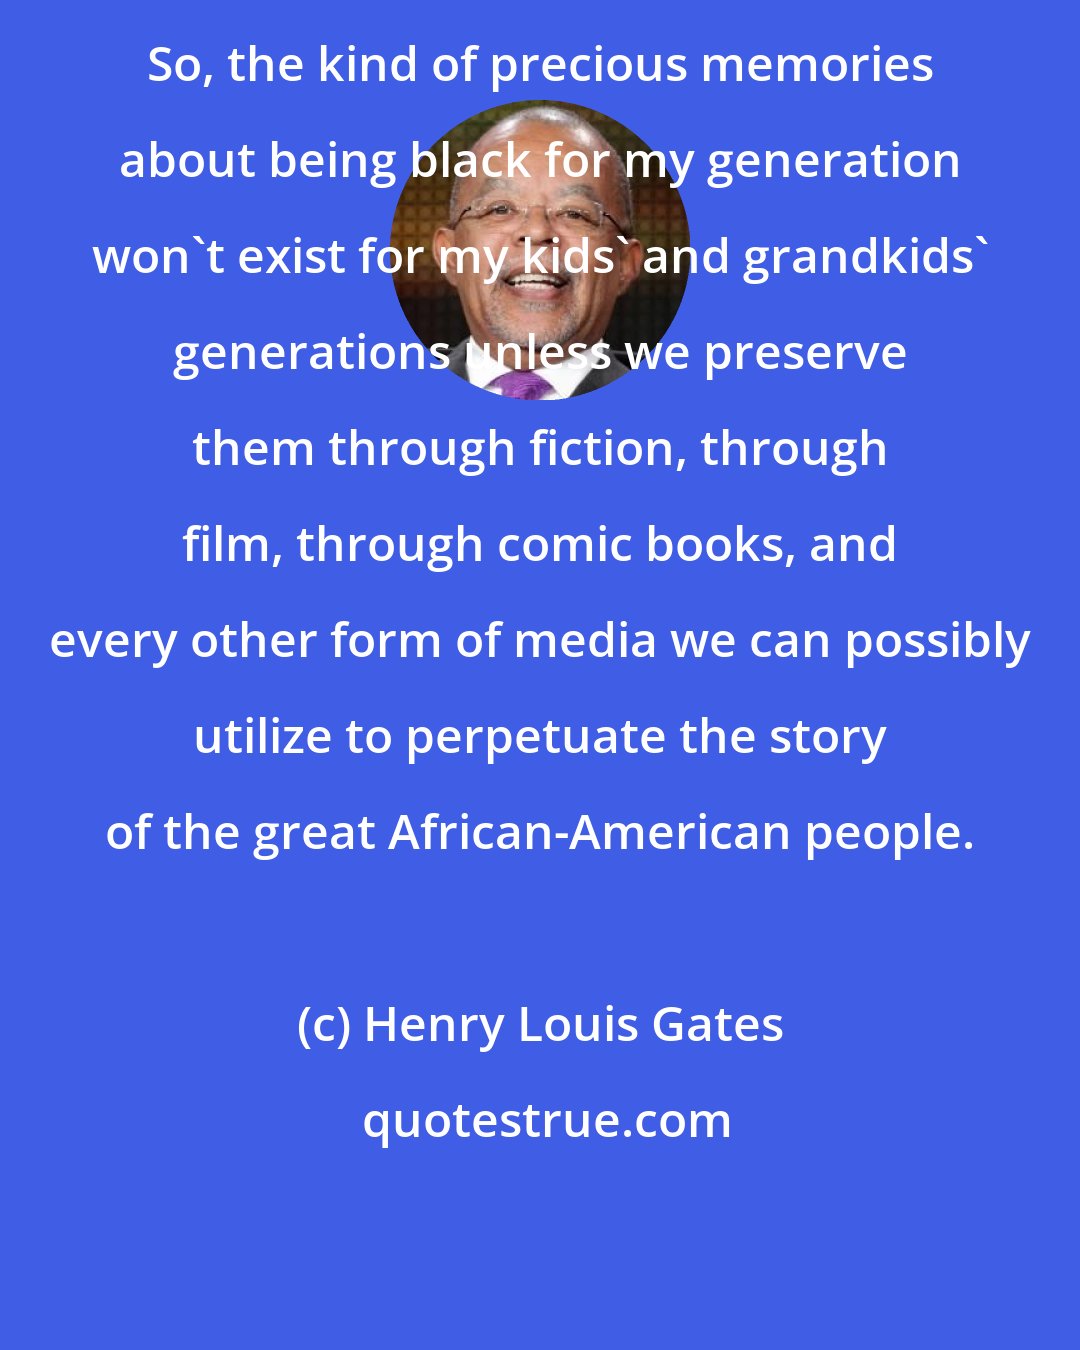 Henry Louis Gates: So, the kind of precious memories about being black for my generation won't exist for my kids' and grandkids' generations unless we preserve them through fiction, through film, through comic books, and every other form of media we can possibly utilize to perpetuate the story of the great African-American people.